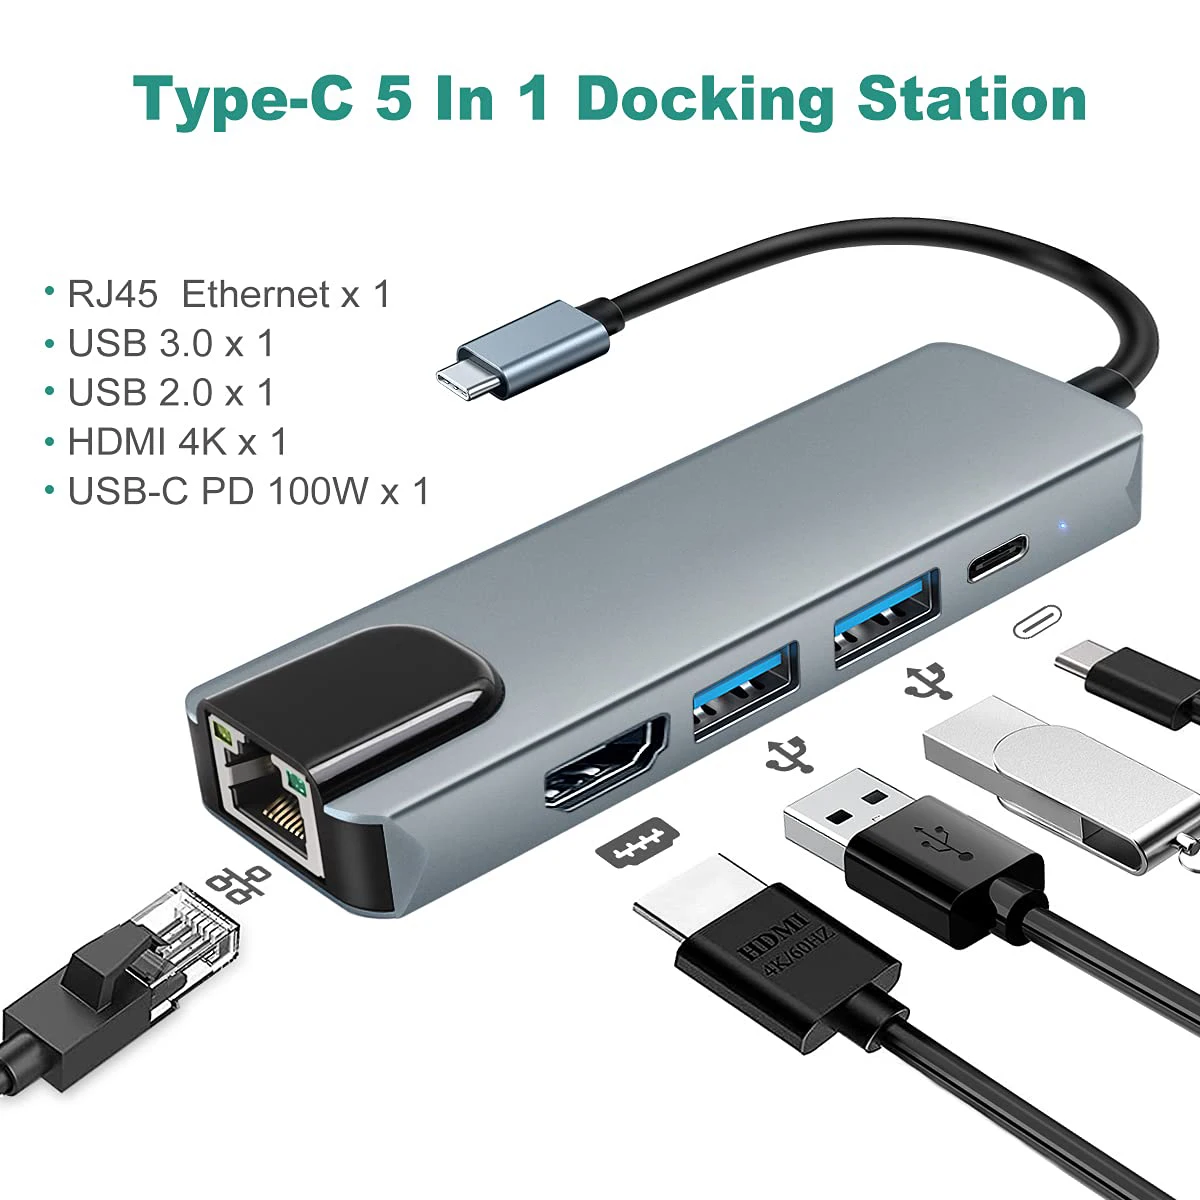 

5 in 1 USB C Hub 4K HDMI-Compatible with Ethernet 100W Power PD Charging Port USB 3.0 Ports for MacBook Pro Chromebook XPS